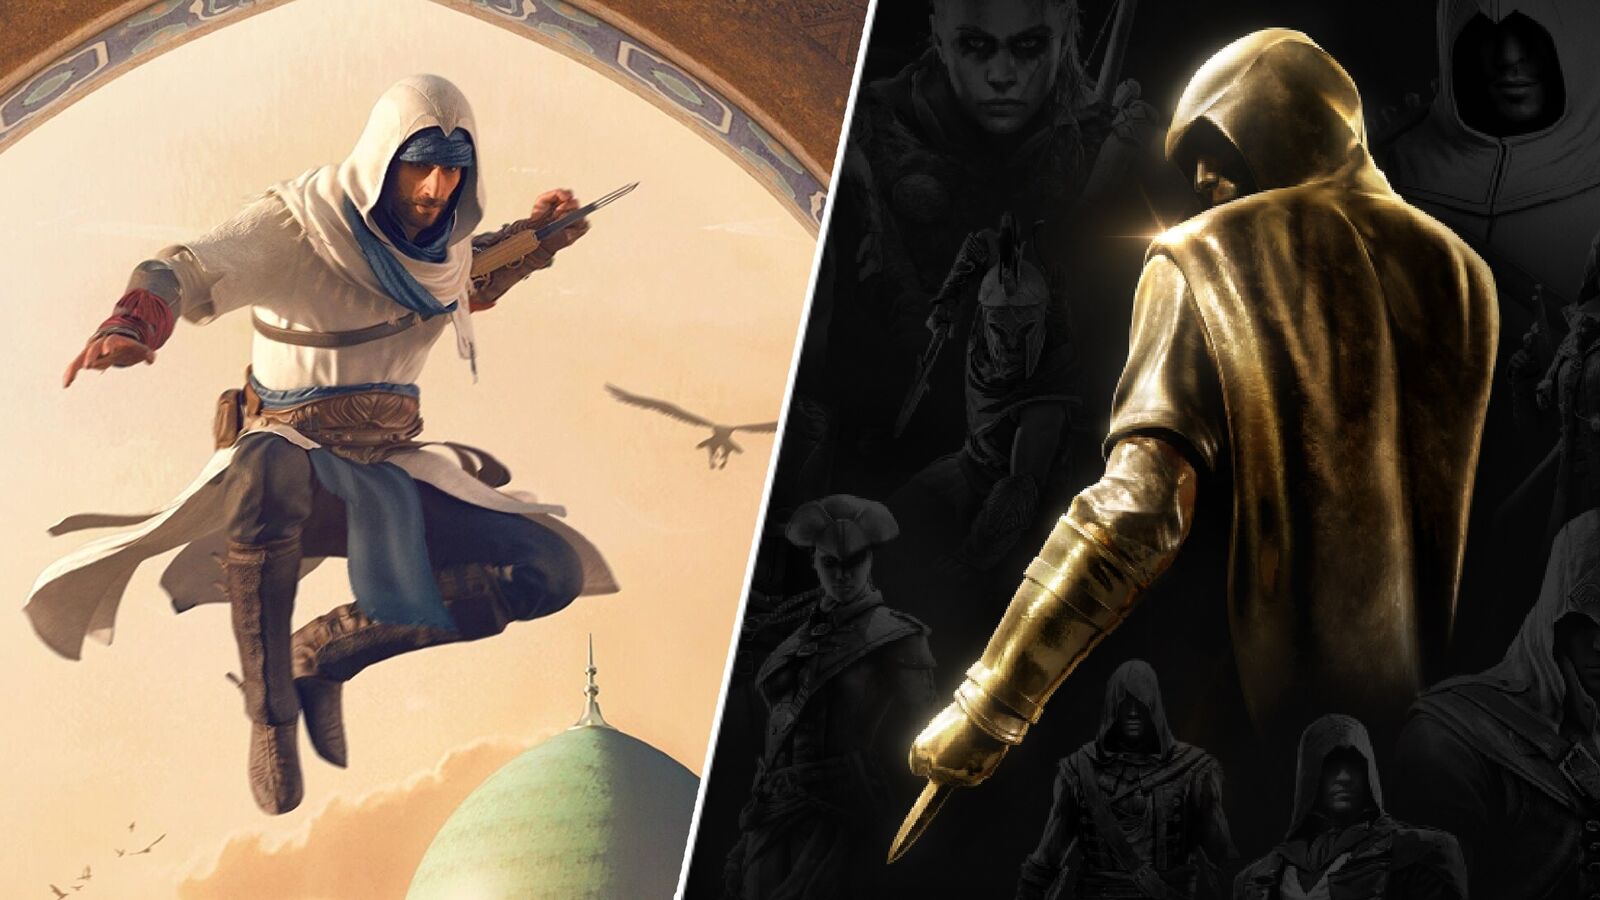 Assassin's Creed Mirage arrives drops RPG elements, wants to go “back to the series' roots”